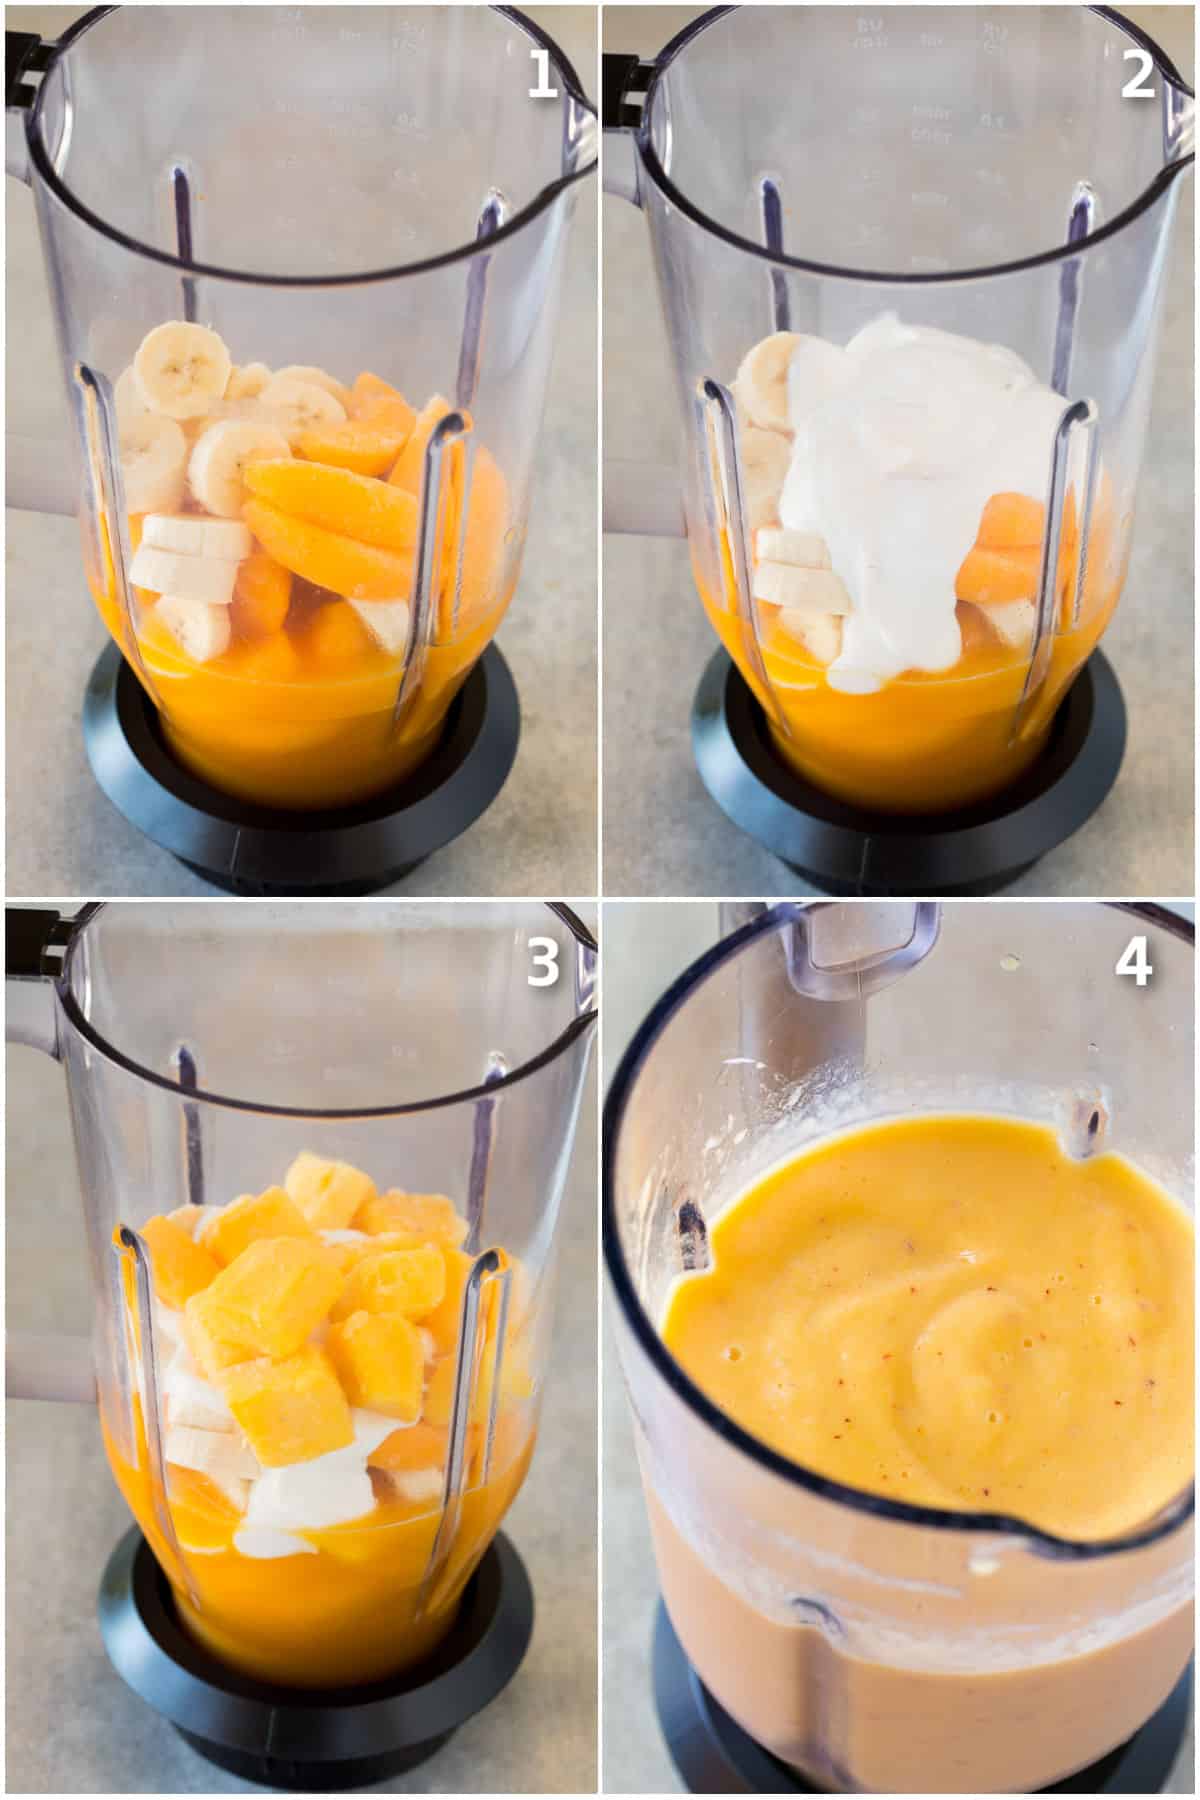 Step by step shots showing how to make a smoothie.